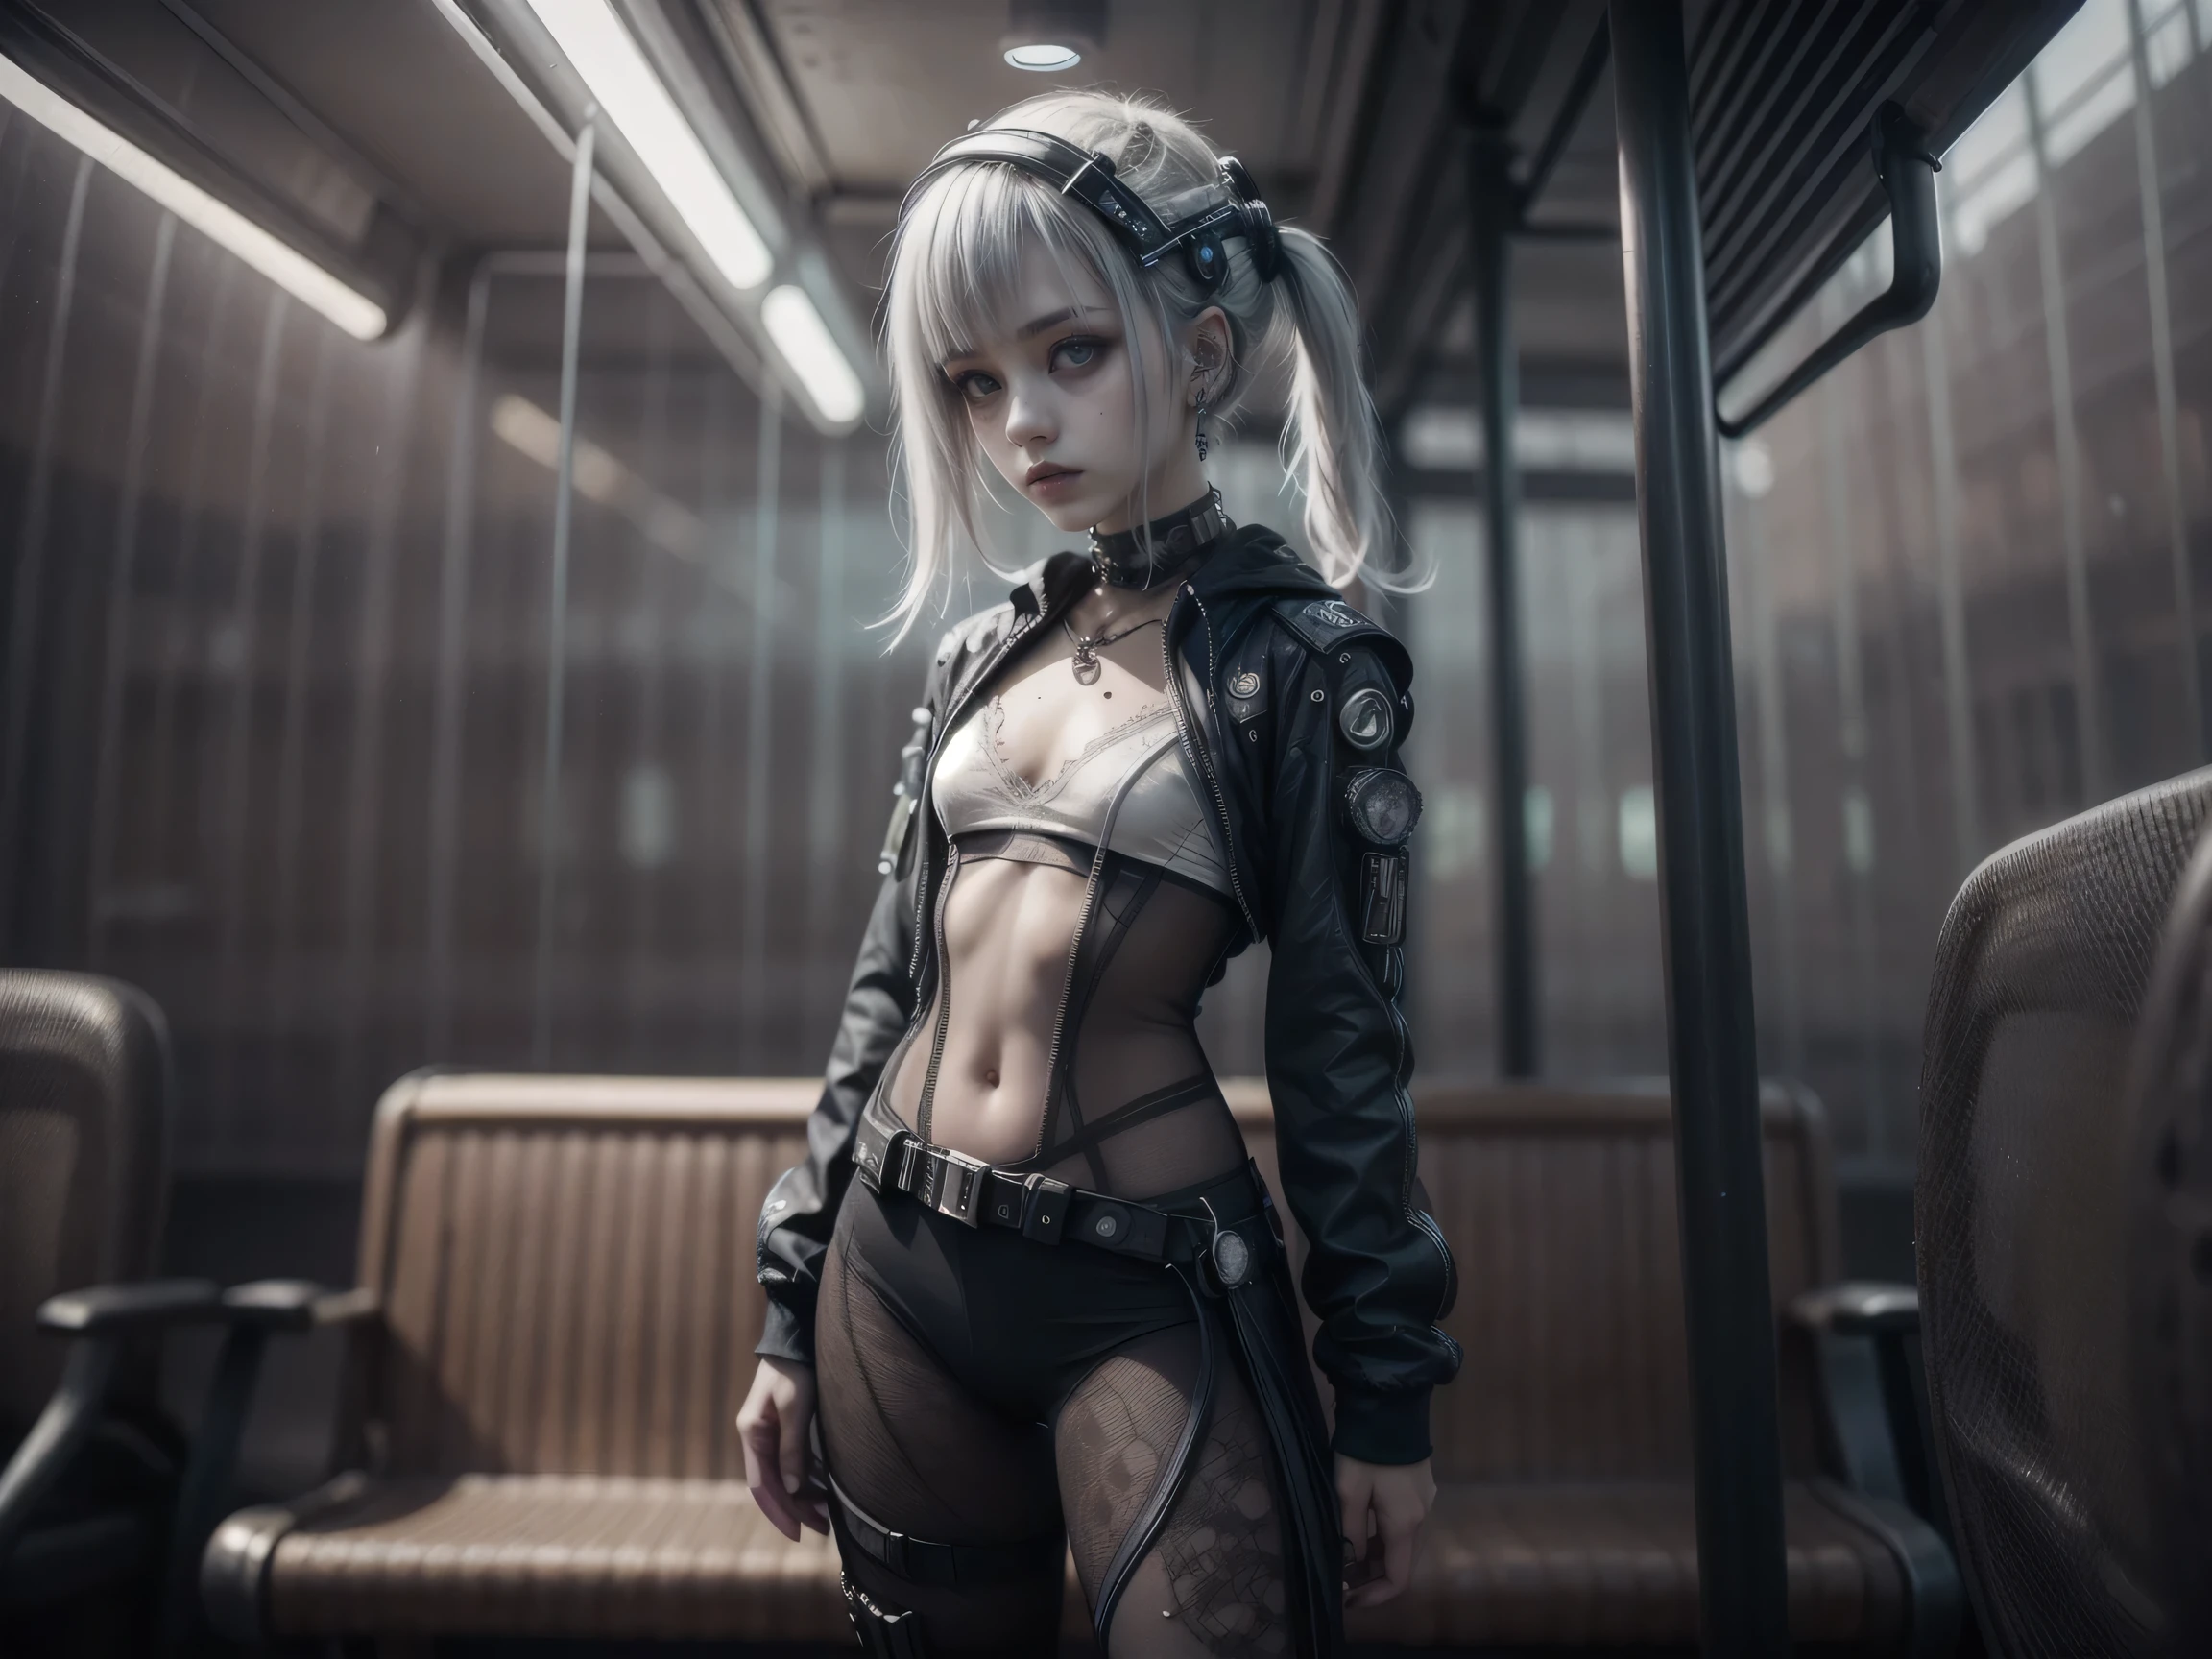 (Whole body in view)1girl, innocent, alone, ((waiting a bus:1.5)), (view_from_front:1.5), (instagram yanakryukova), (seductive_facial_expression:1.4), sweety, cute, kawaii, perfect face, galactic_young_princess, ((little breasts, flat_chested, small chest:1.6)), ((little nipples, natural nipples)), top model figure, (skinny), (perfect little ass, round ass, long legs, slim legs), pale skin, soft skin, caucasian teenager, slender girl, natural make-up on eyes only, perfecteyes, black_eyes, (innocent_looking:1.4), oval jaw, freckles, natural_beauty, (white hair, bright pink hair, dreadlocked pigtails, long bangs, drill hair), ((she is wearing a transparent lace bodysuit,  print cotton leggings, white transparent lace hoodie, lace collarbone, cleavage cutout, cameltoe, and techwear high boots)), ((wearing an intricate detailed techwear white outfit)), ((cute neon head accesories:1.6)), punk_hair_ornaments, pastel_goth, punk, fantasy_princess, necklace, earring, cute 18 years old girl, skinny young girl, white theme, (bokeh, depth of field, blurry background, light particles, fog), ((detailed sci-fi cyberpunk bus stop background:1.6)), ((real life, realistic, profesional photography, photo_realistic, hyper_realism, ultra-detailed)), photography by Tim Walker, Tim Walker masterpiece, best_quality, 8K, soft tones, pastel tones, low saturation, (contrast:0.3), muted colors, cold light, neon, Ex_Machina_movie, studio light